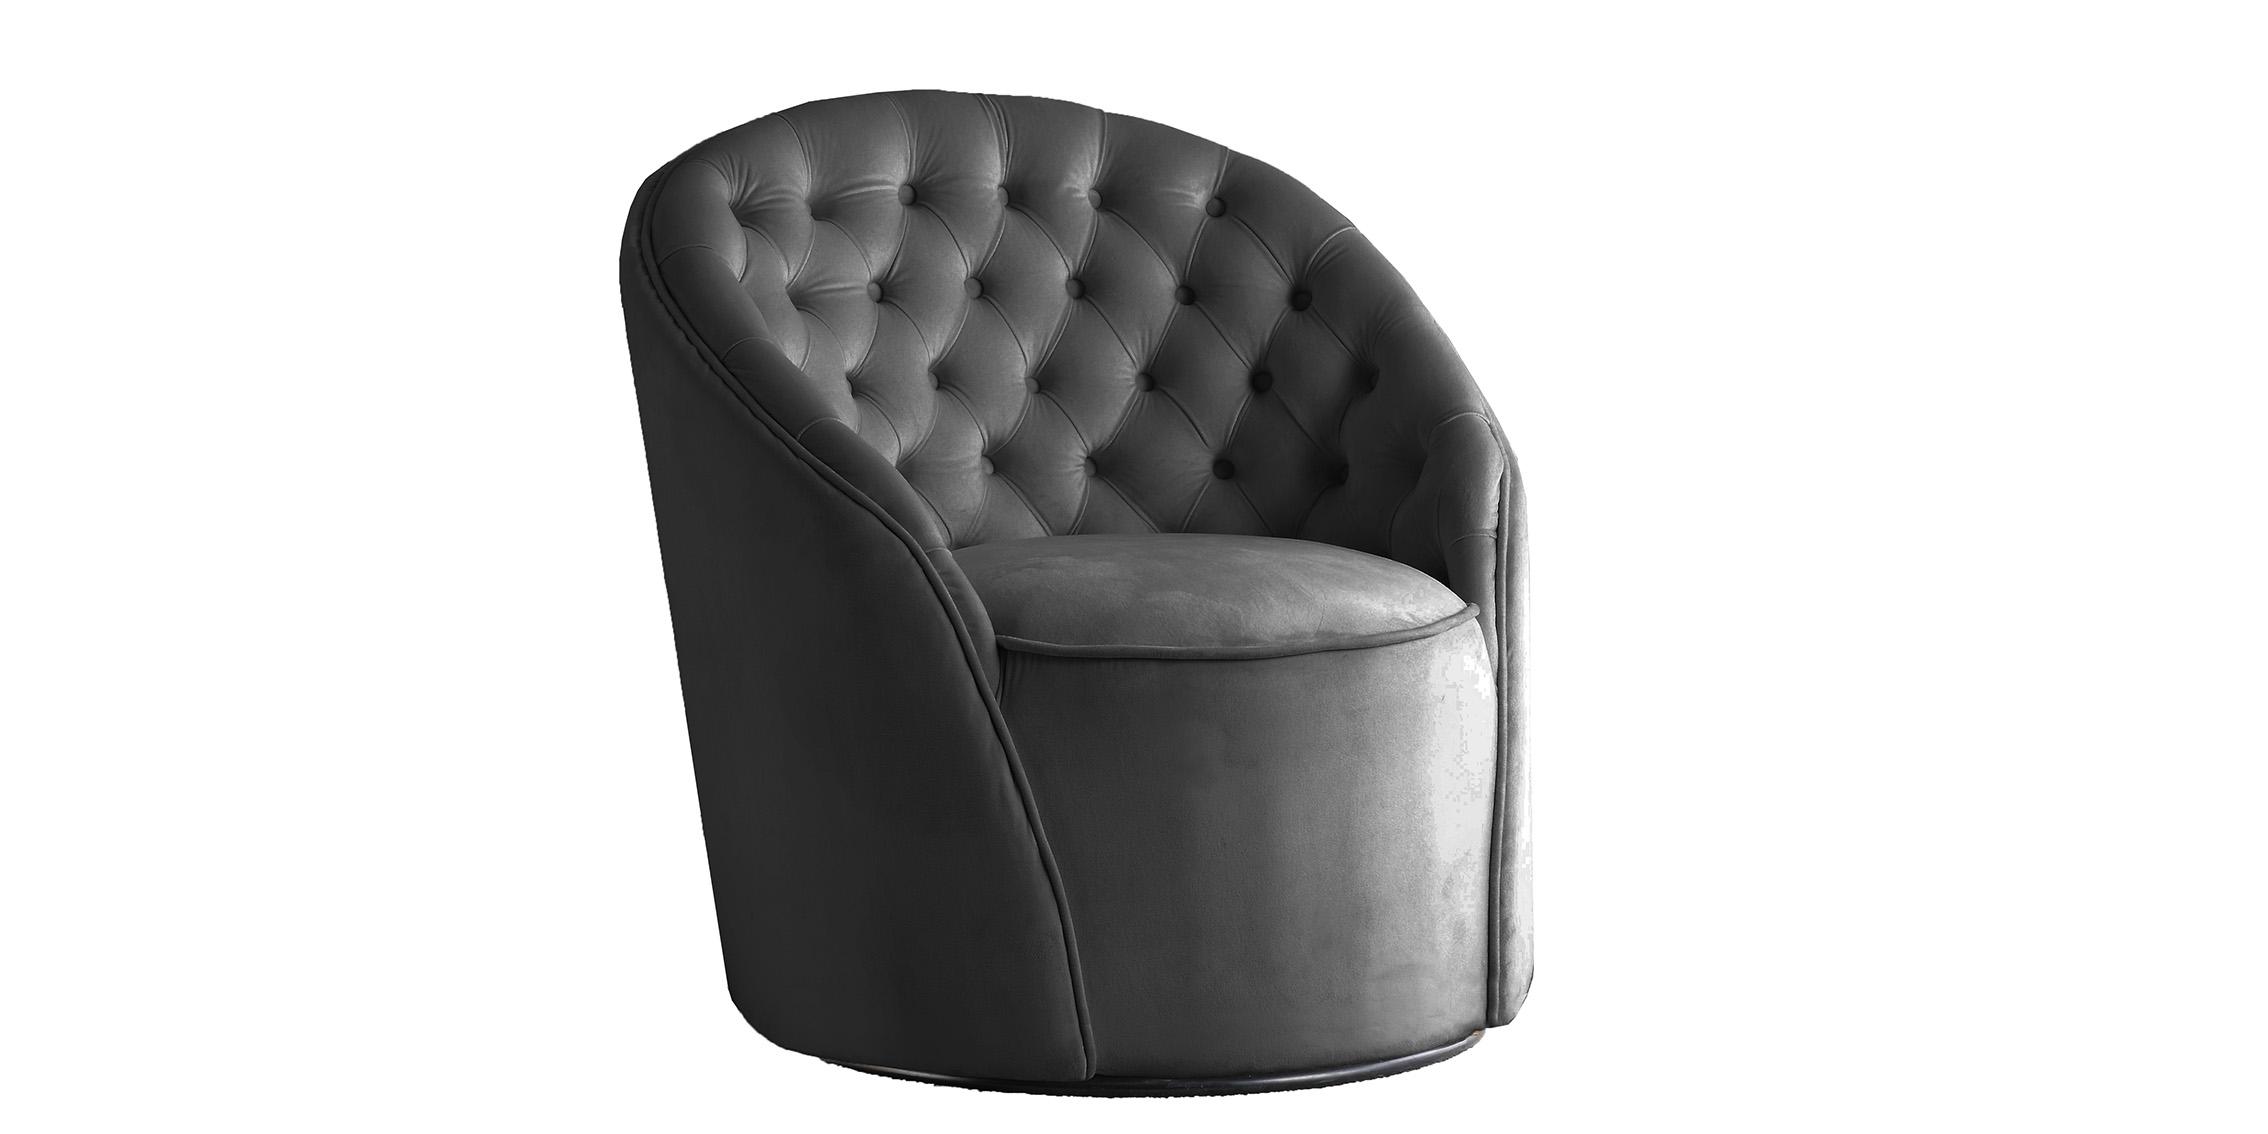 Contemporary, Modern Accent Chair ALESSIO 501Grey 501Grey in Gray Velvet